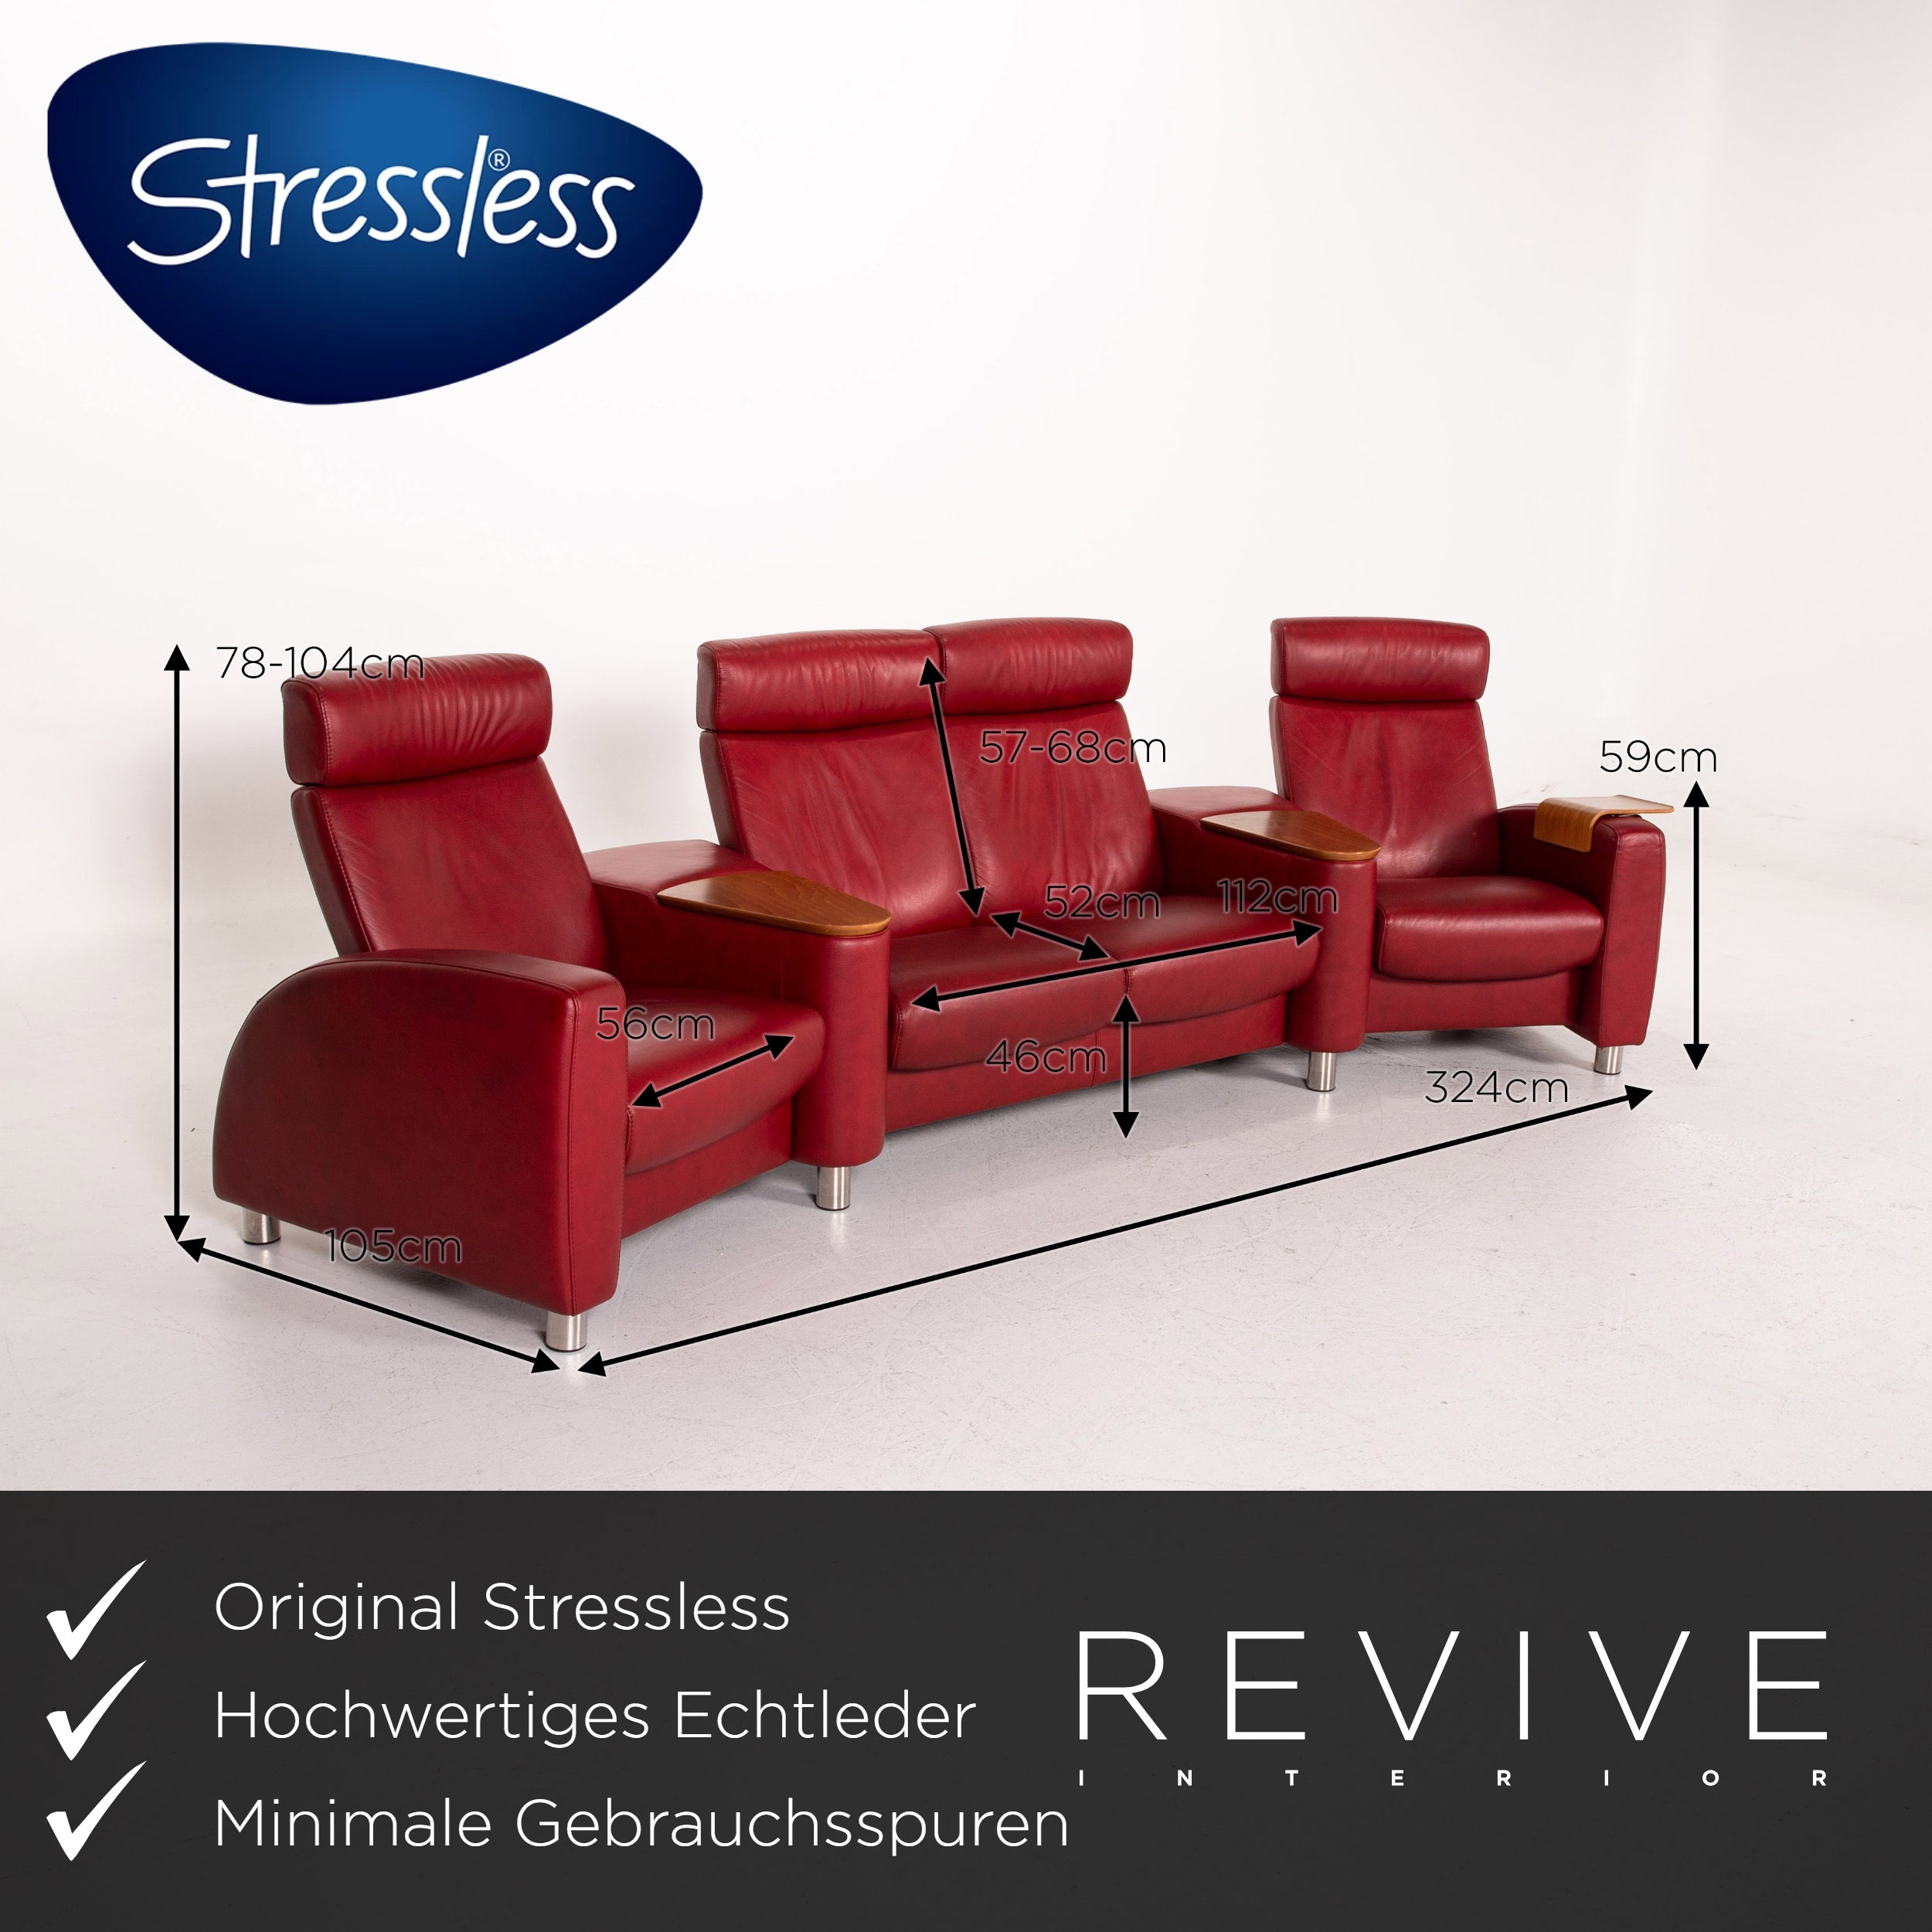 Stressless Arion Leder Sofa Rot Viersitzer Heimkino Relaxfunktion Funktion Couch #14524